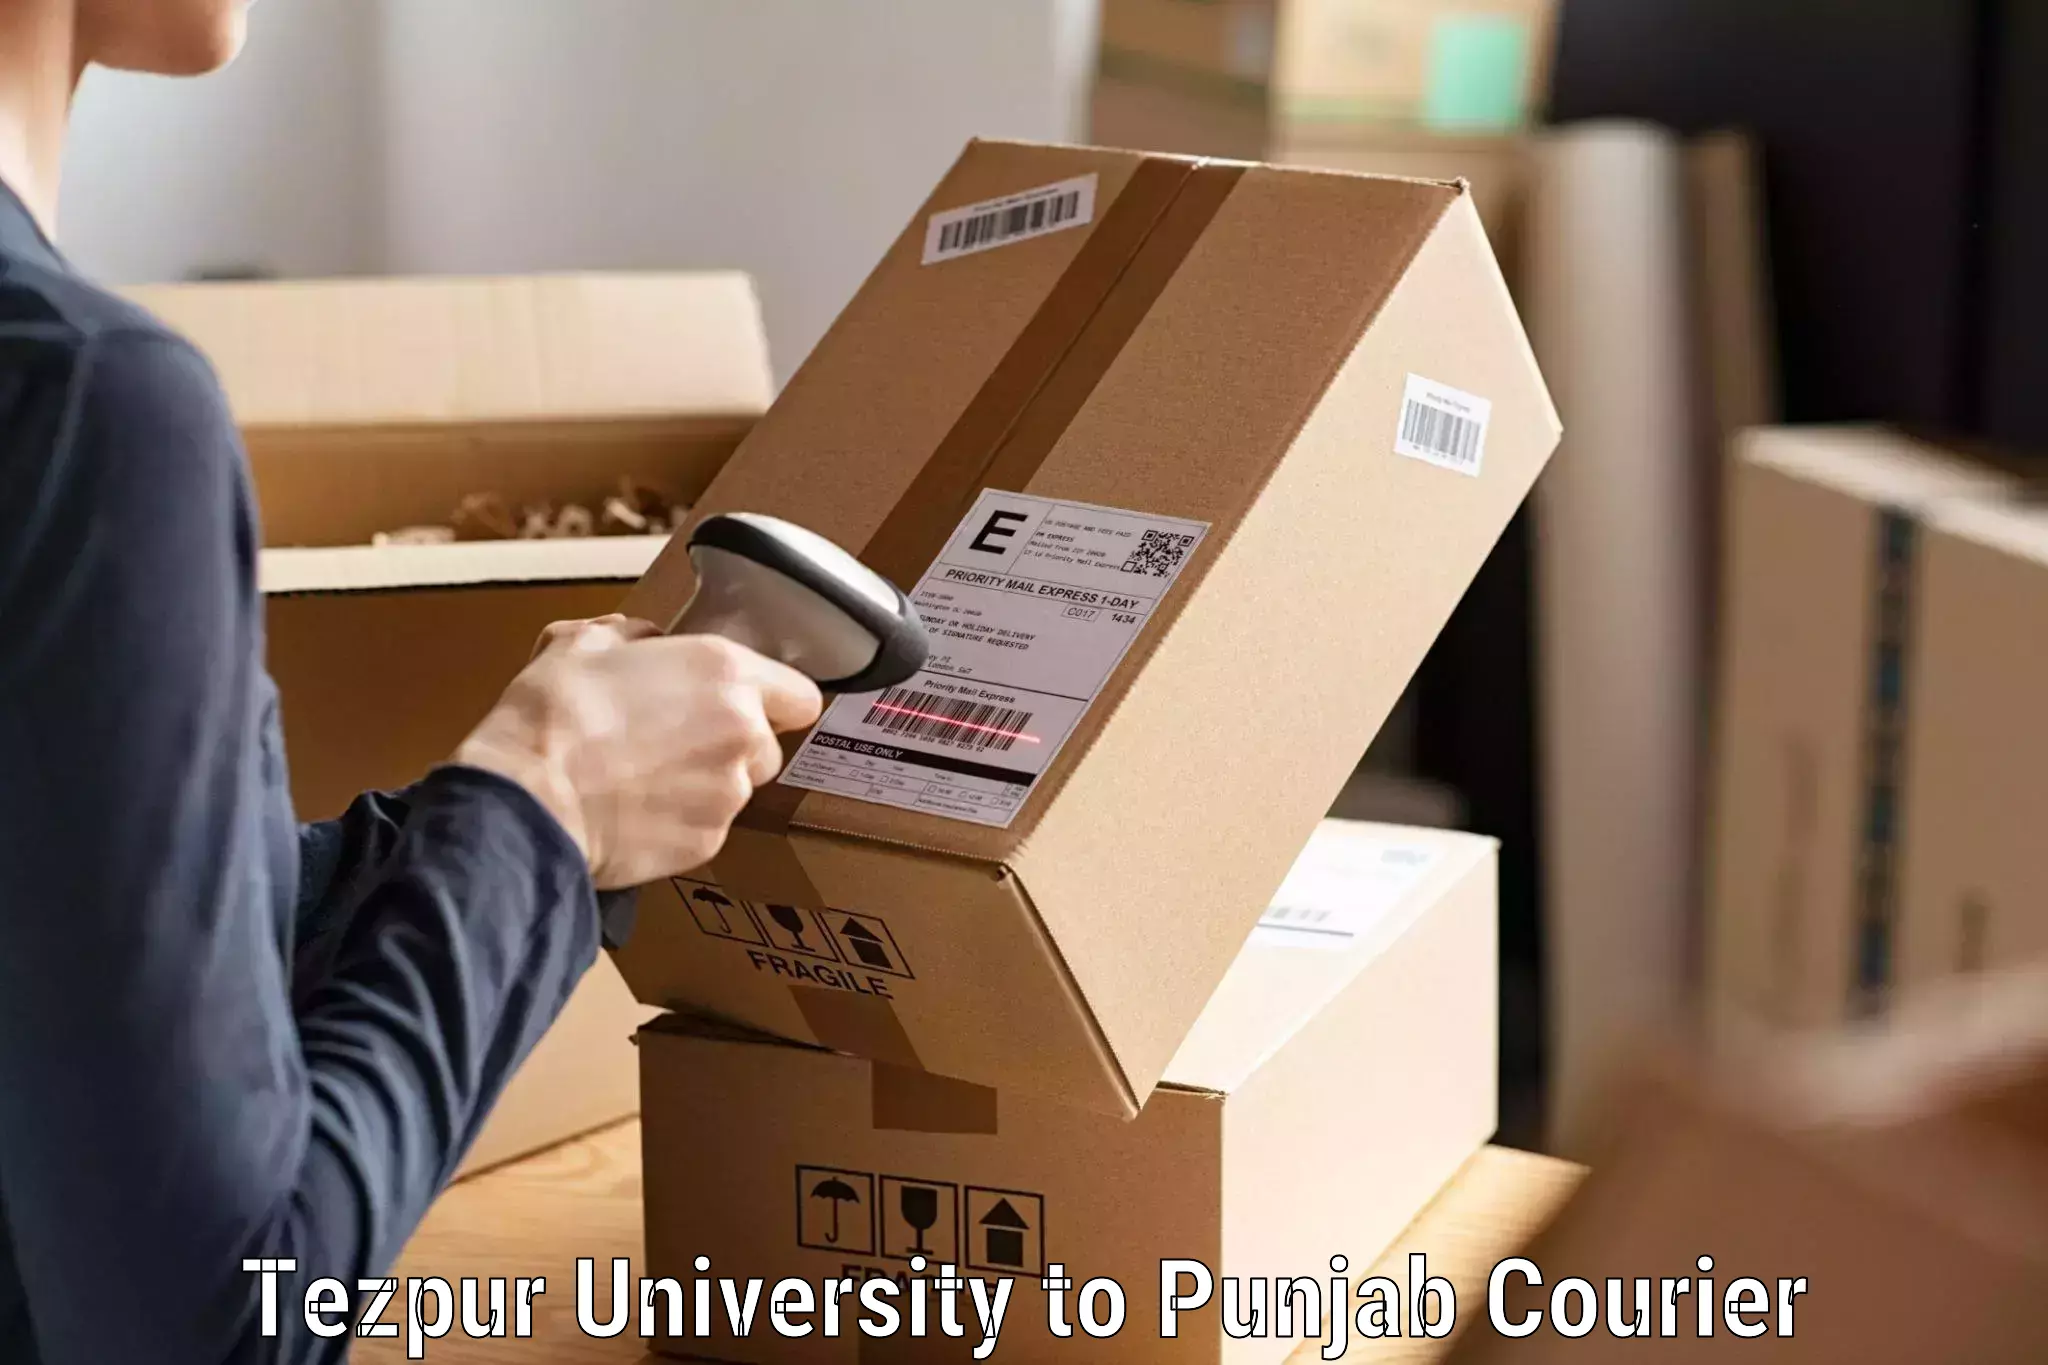 Business courier solutions Tezpur University to Dinanagar